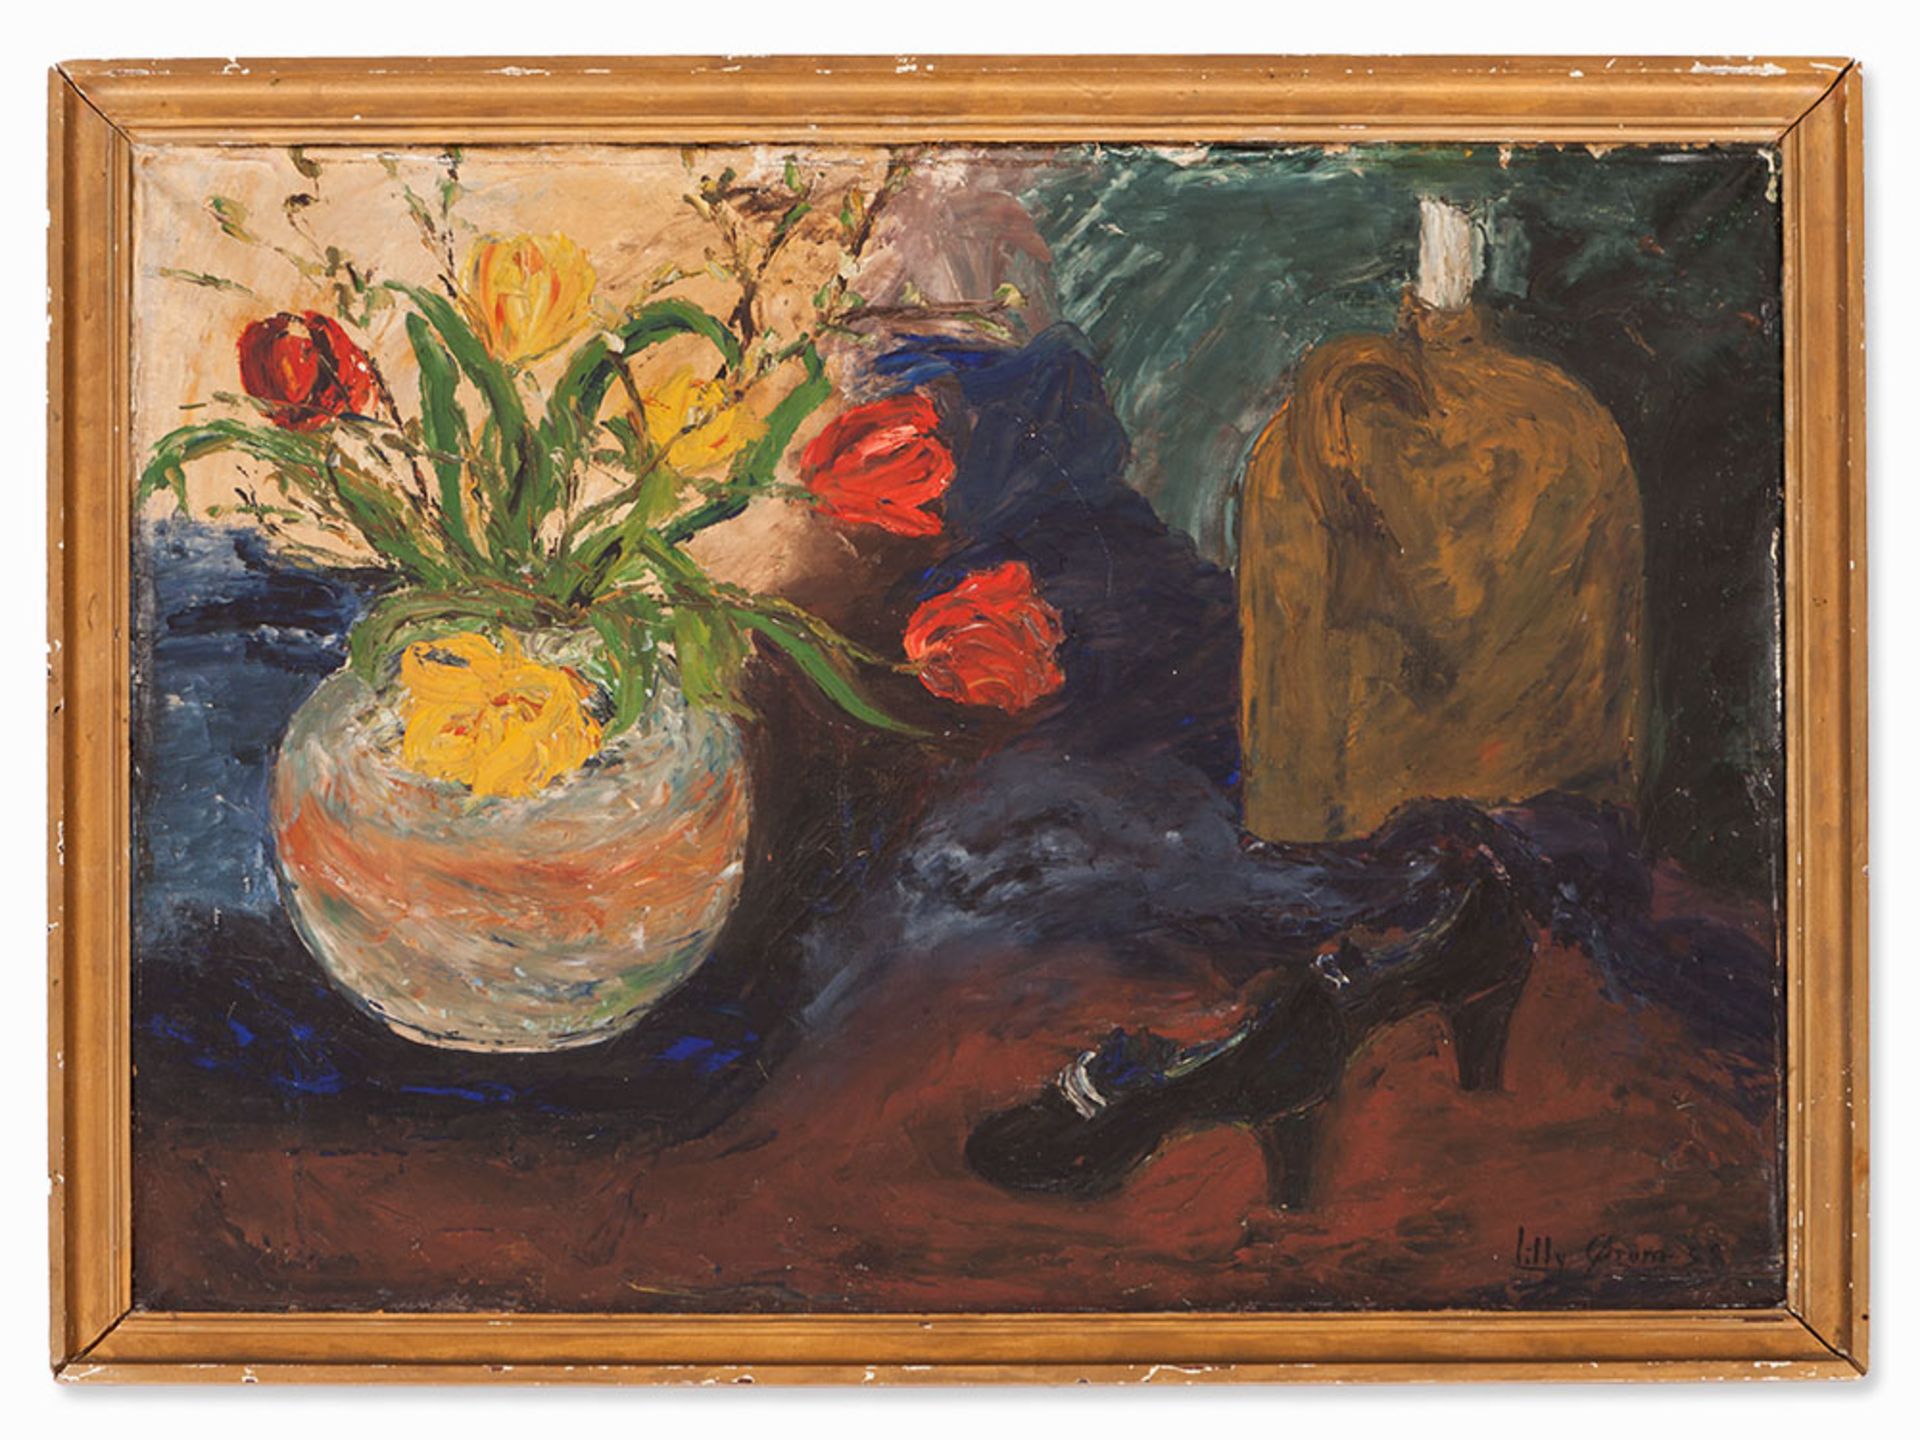 Lilly Ørum, Oil Painting, Flower Still Life with Shoes, 1938 - Image 2 of 8